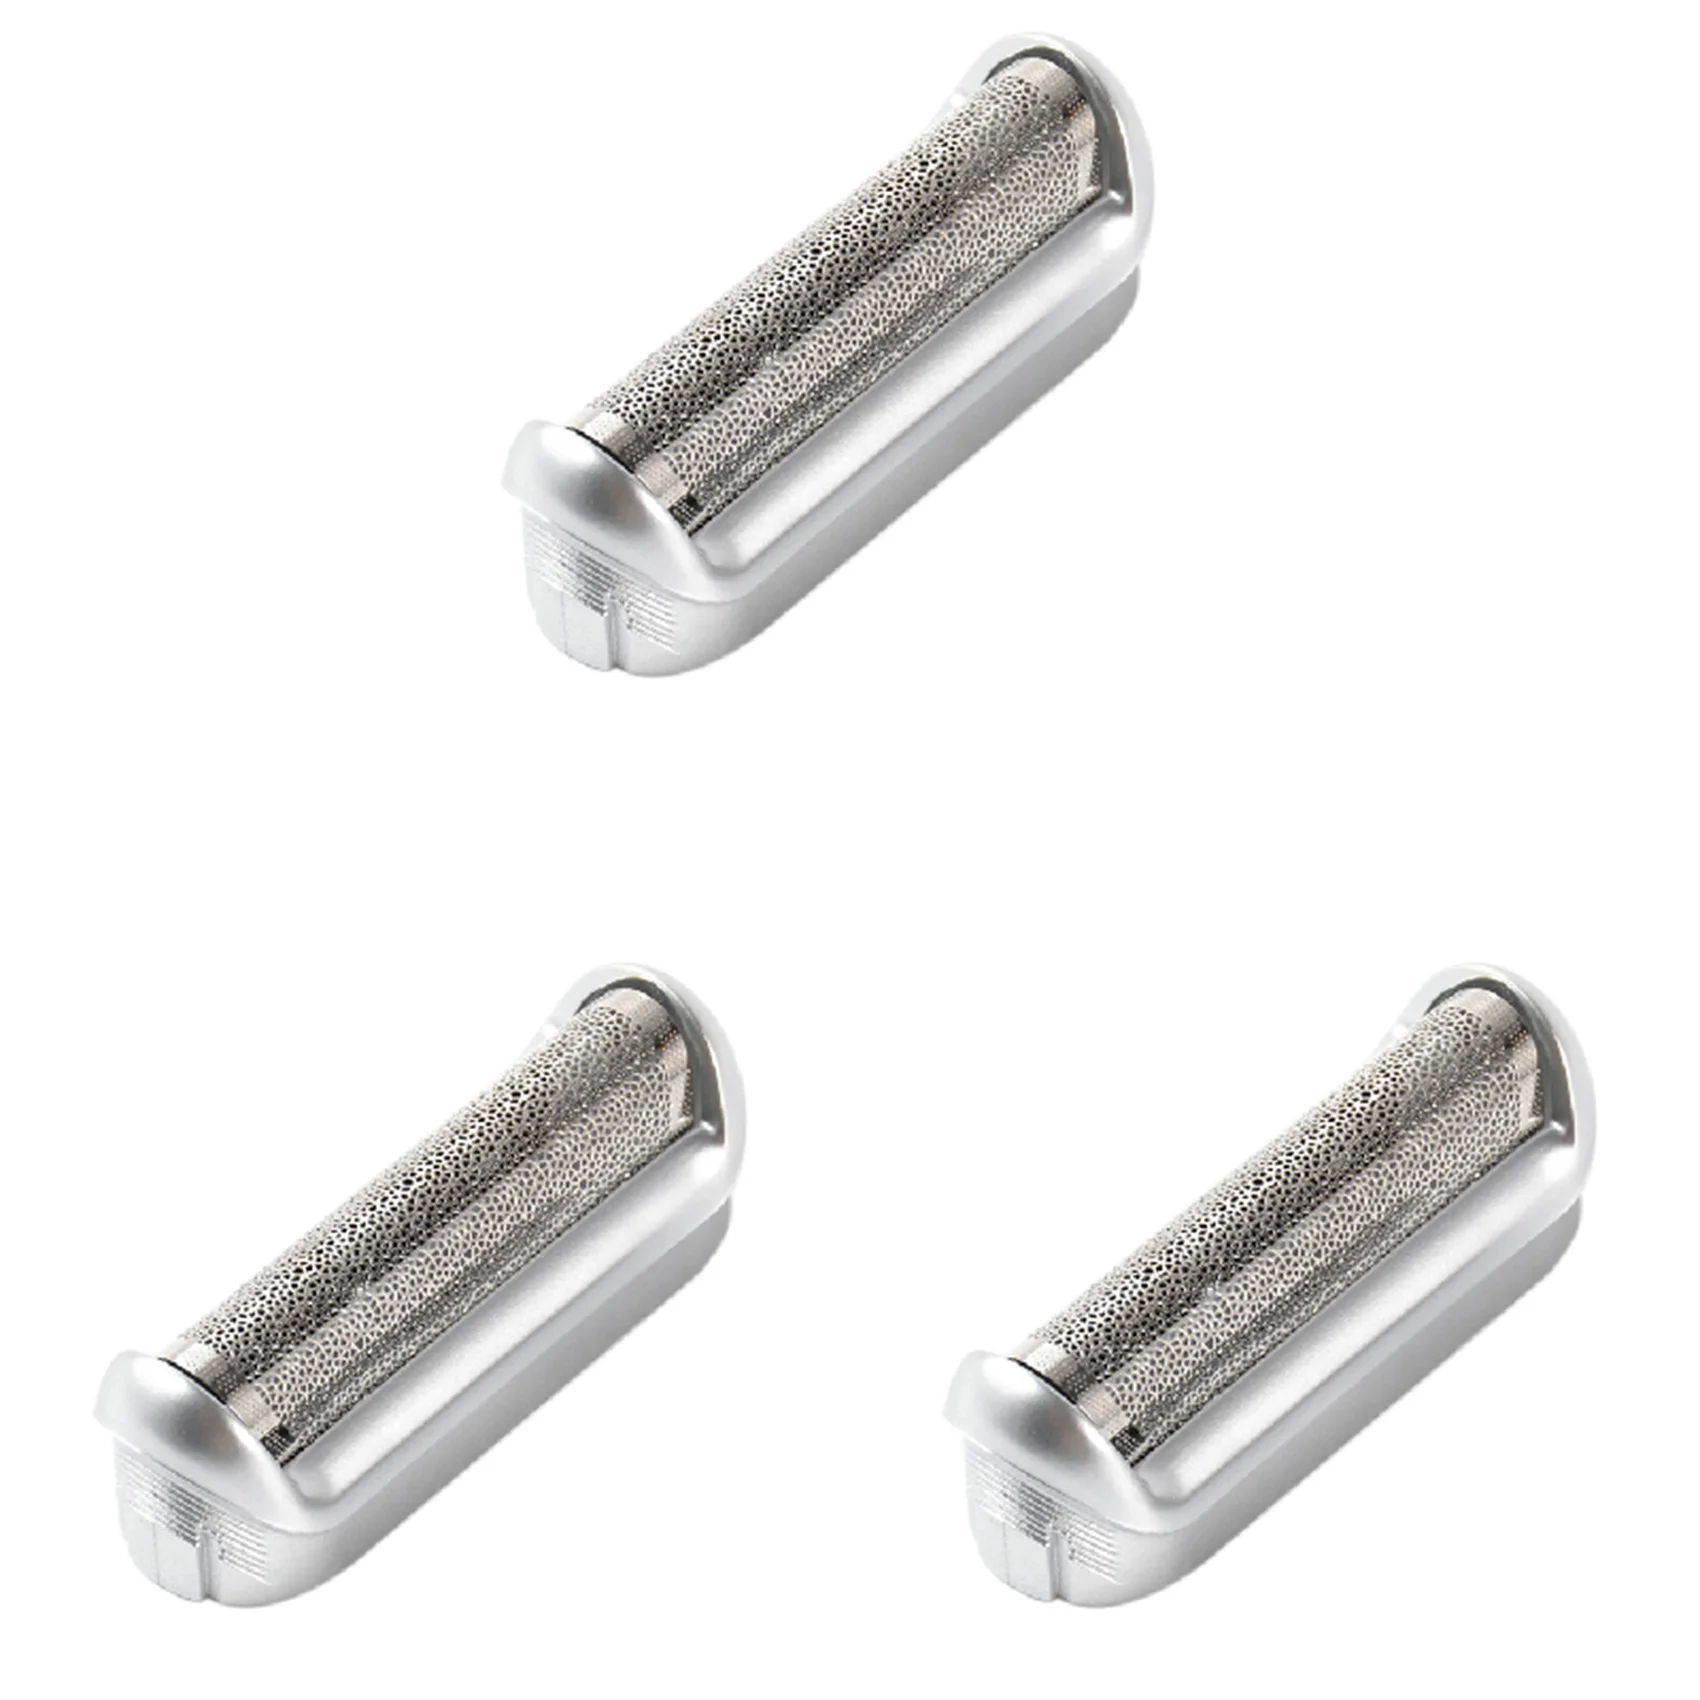 

3X Replacement Shaver Foil and Cutter Fits Braun Cruzer 5S P40 P50 P60 P70 P80 P90 M30 M60 M90 550 555 570 575 5604 5607